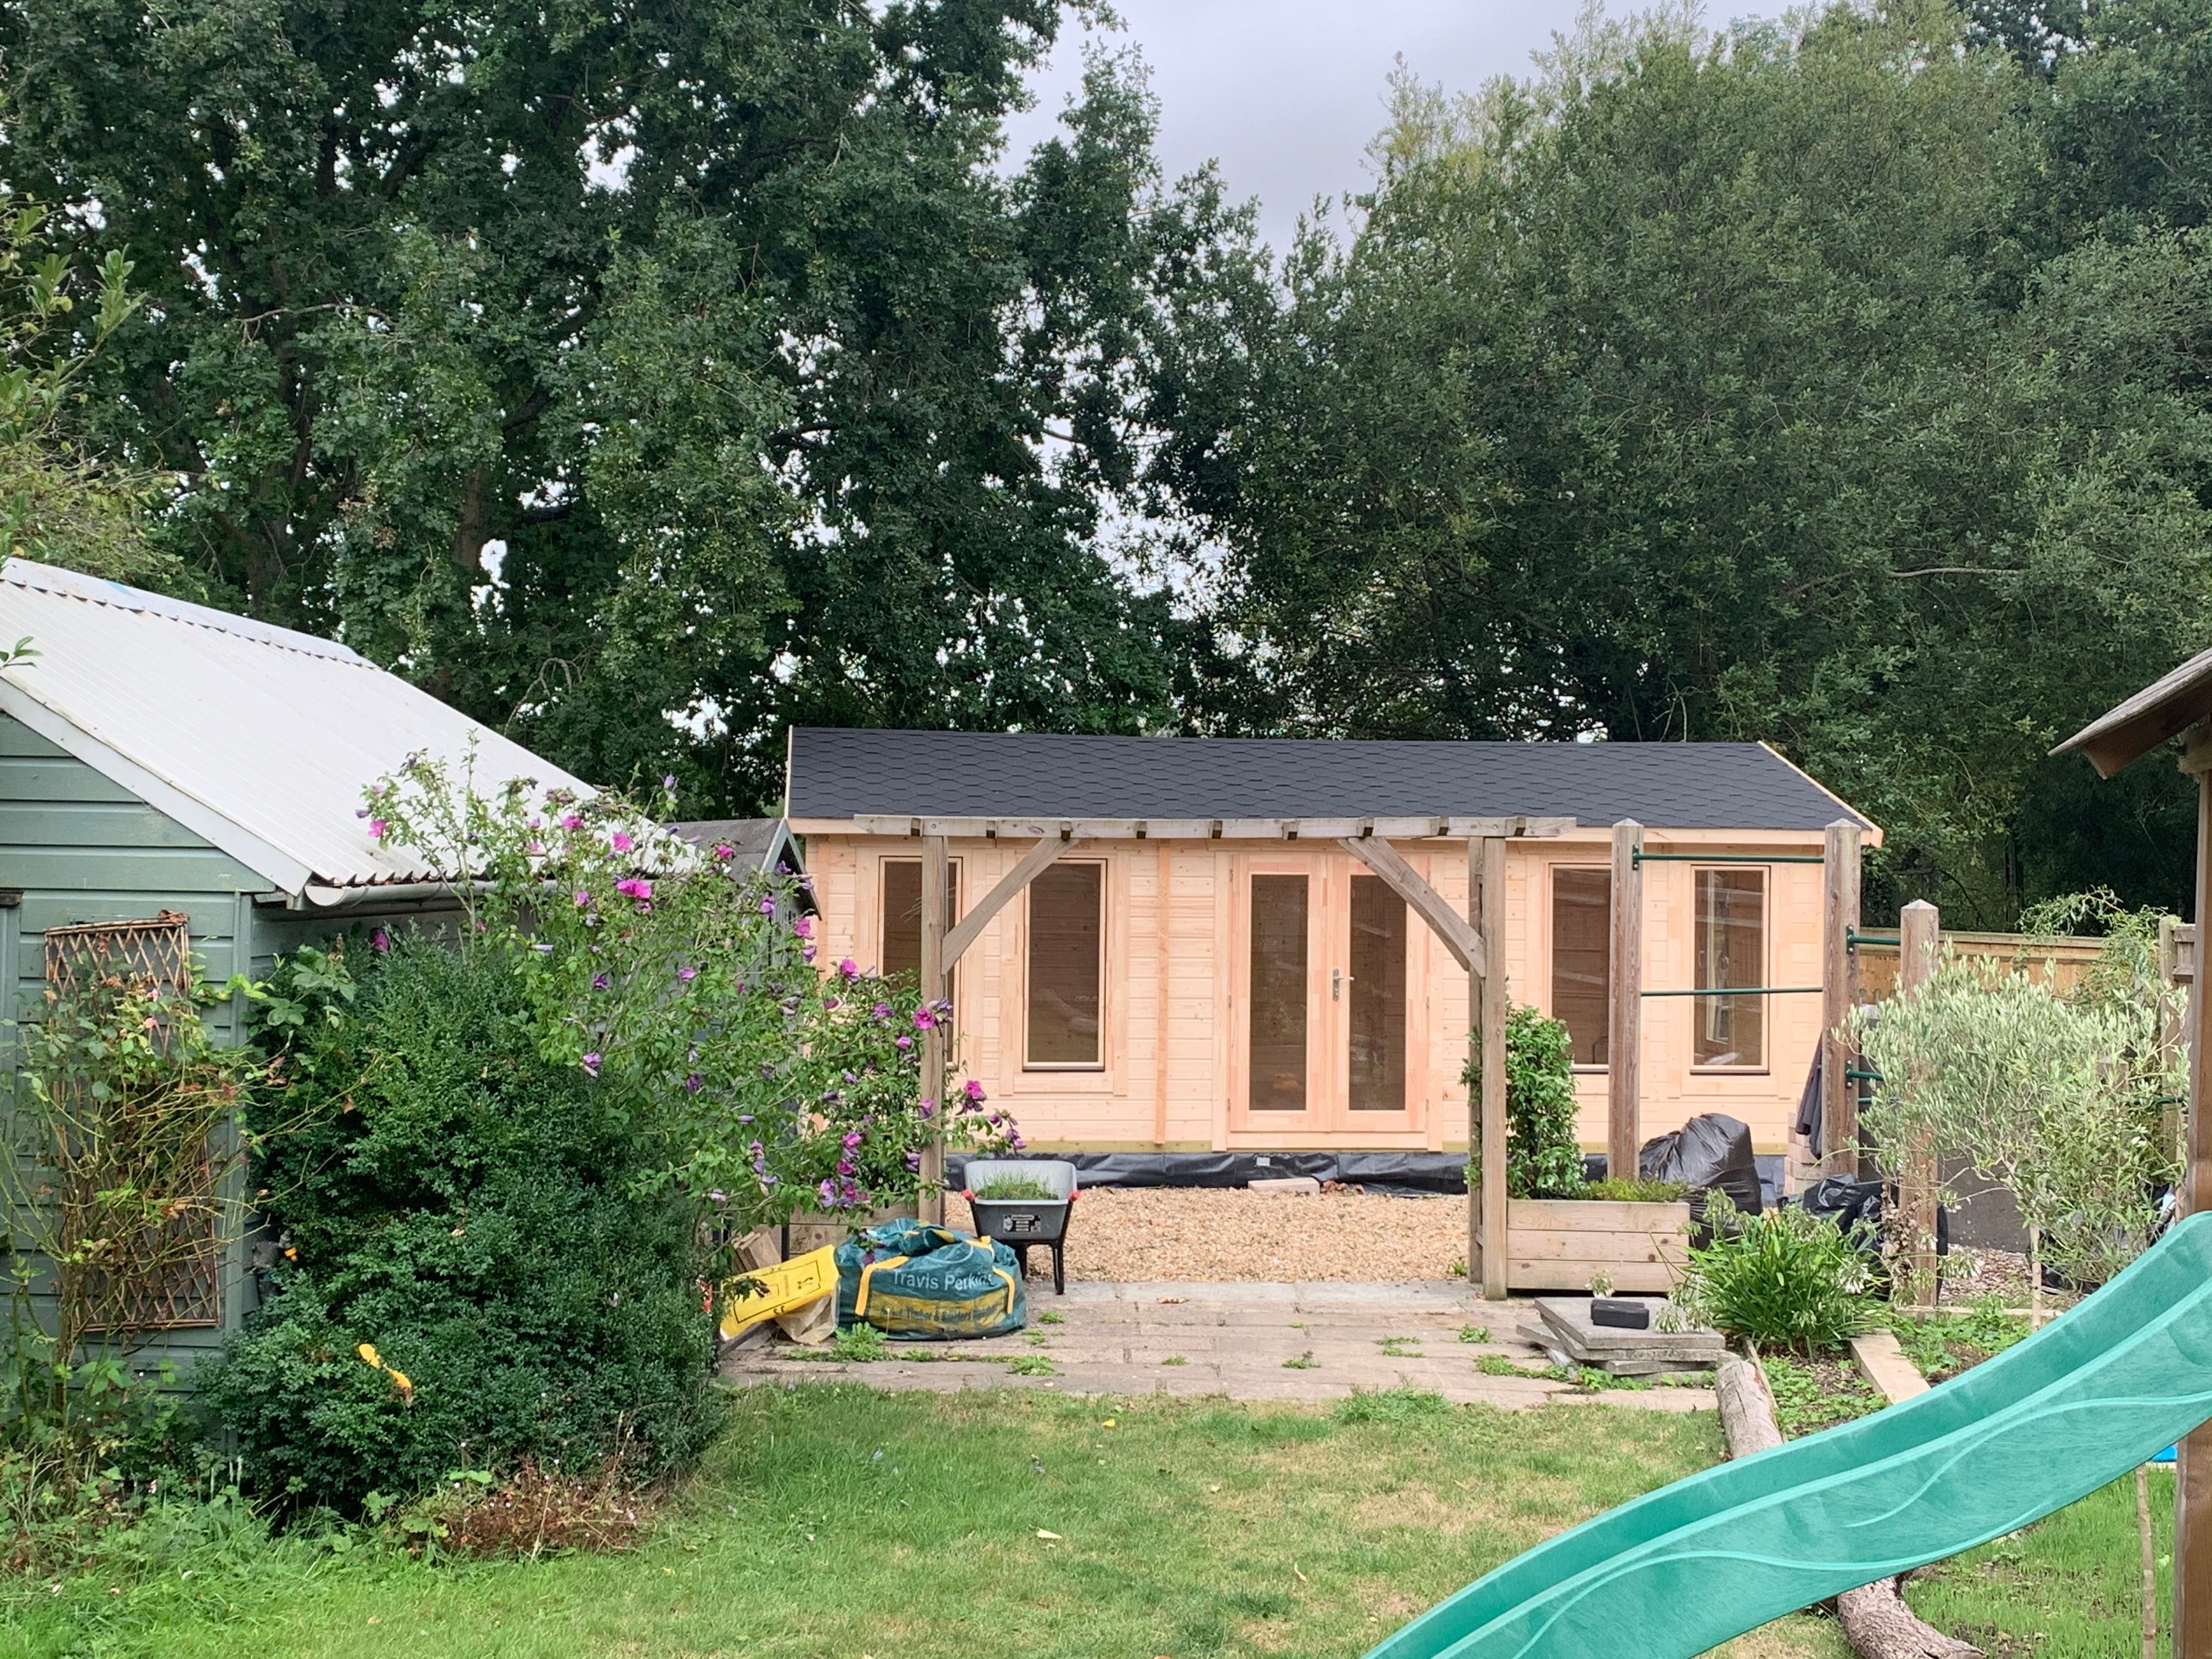 LCS149 Log Cabin | 7.0x4.0m In the garden